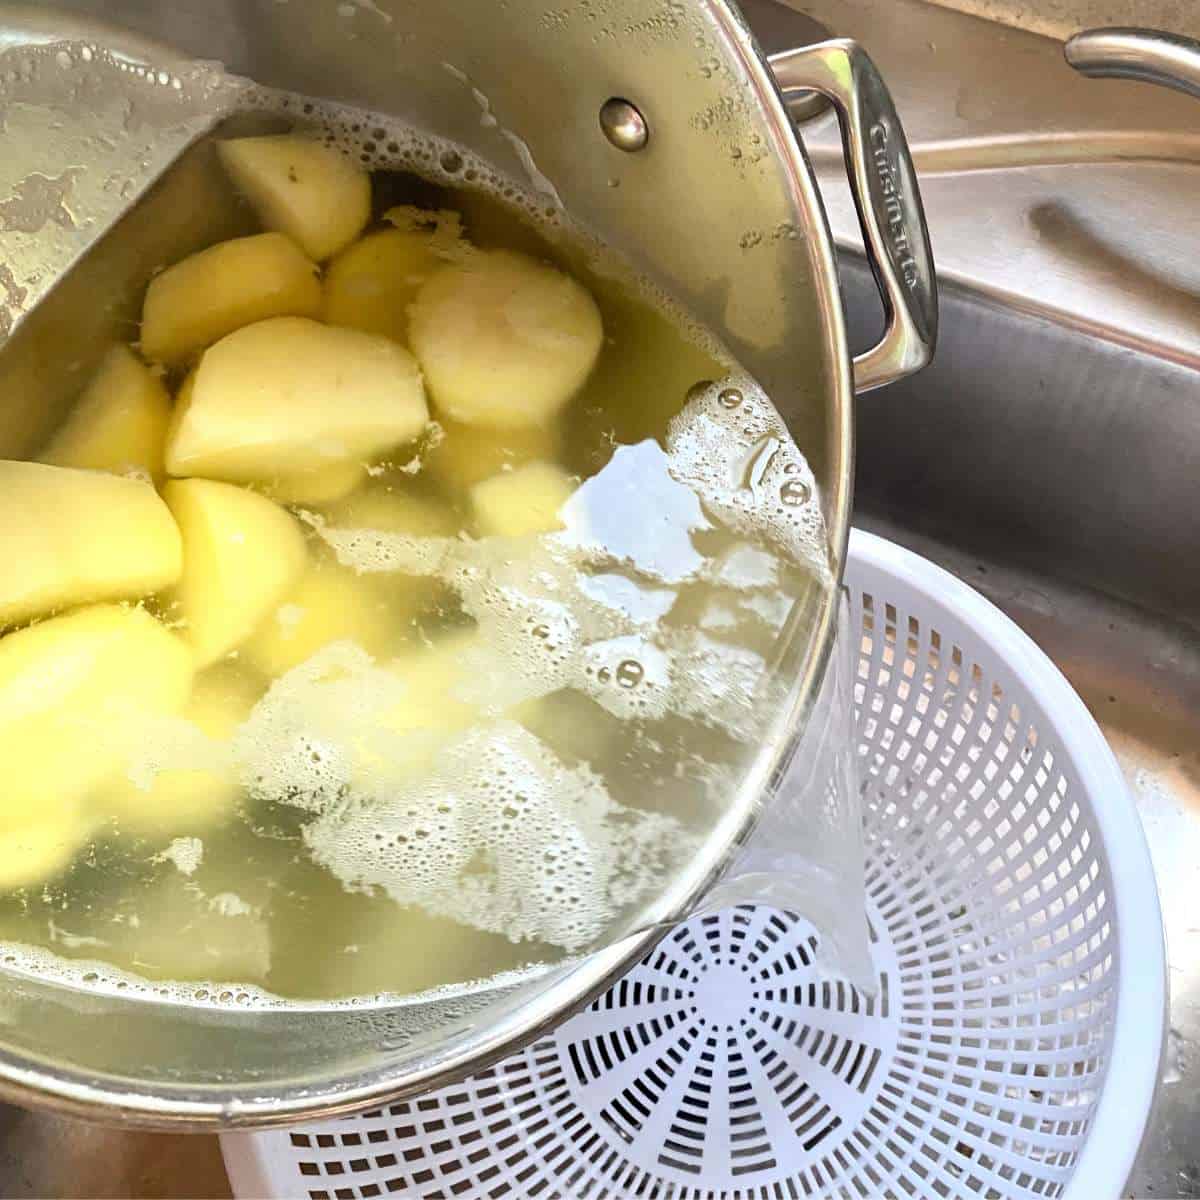 Water being poured out of a stockpot into a colander.